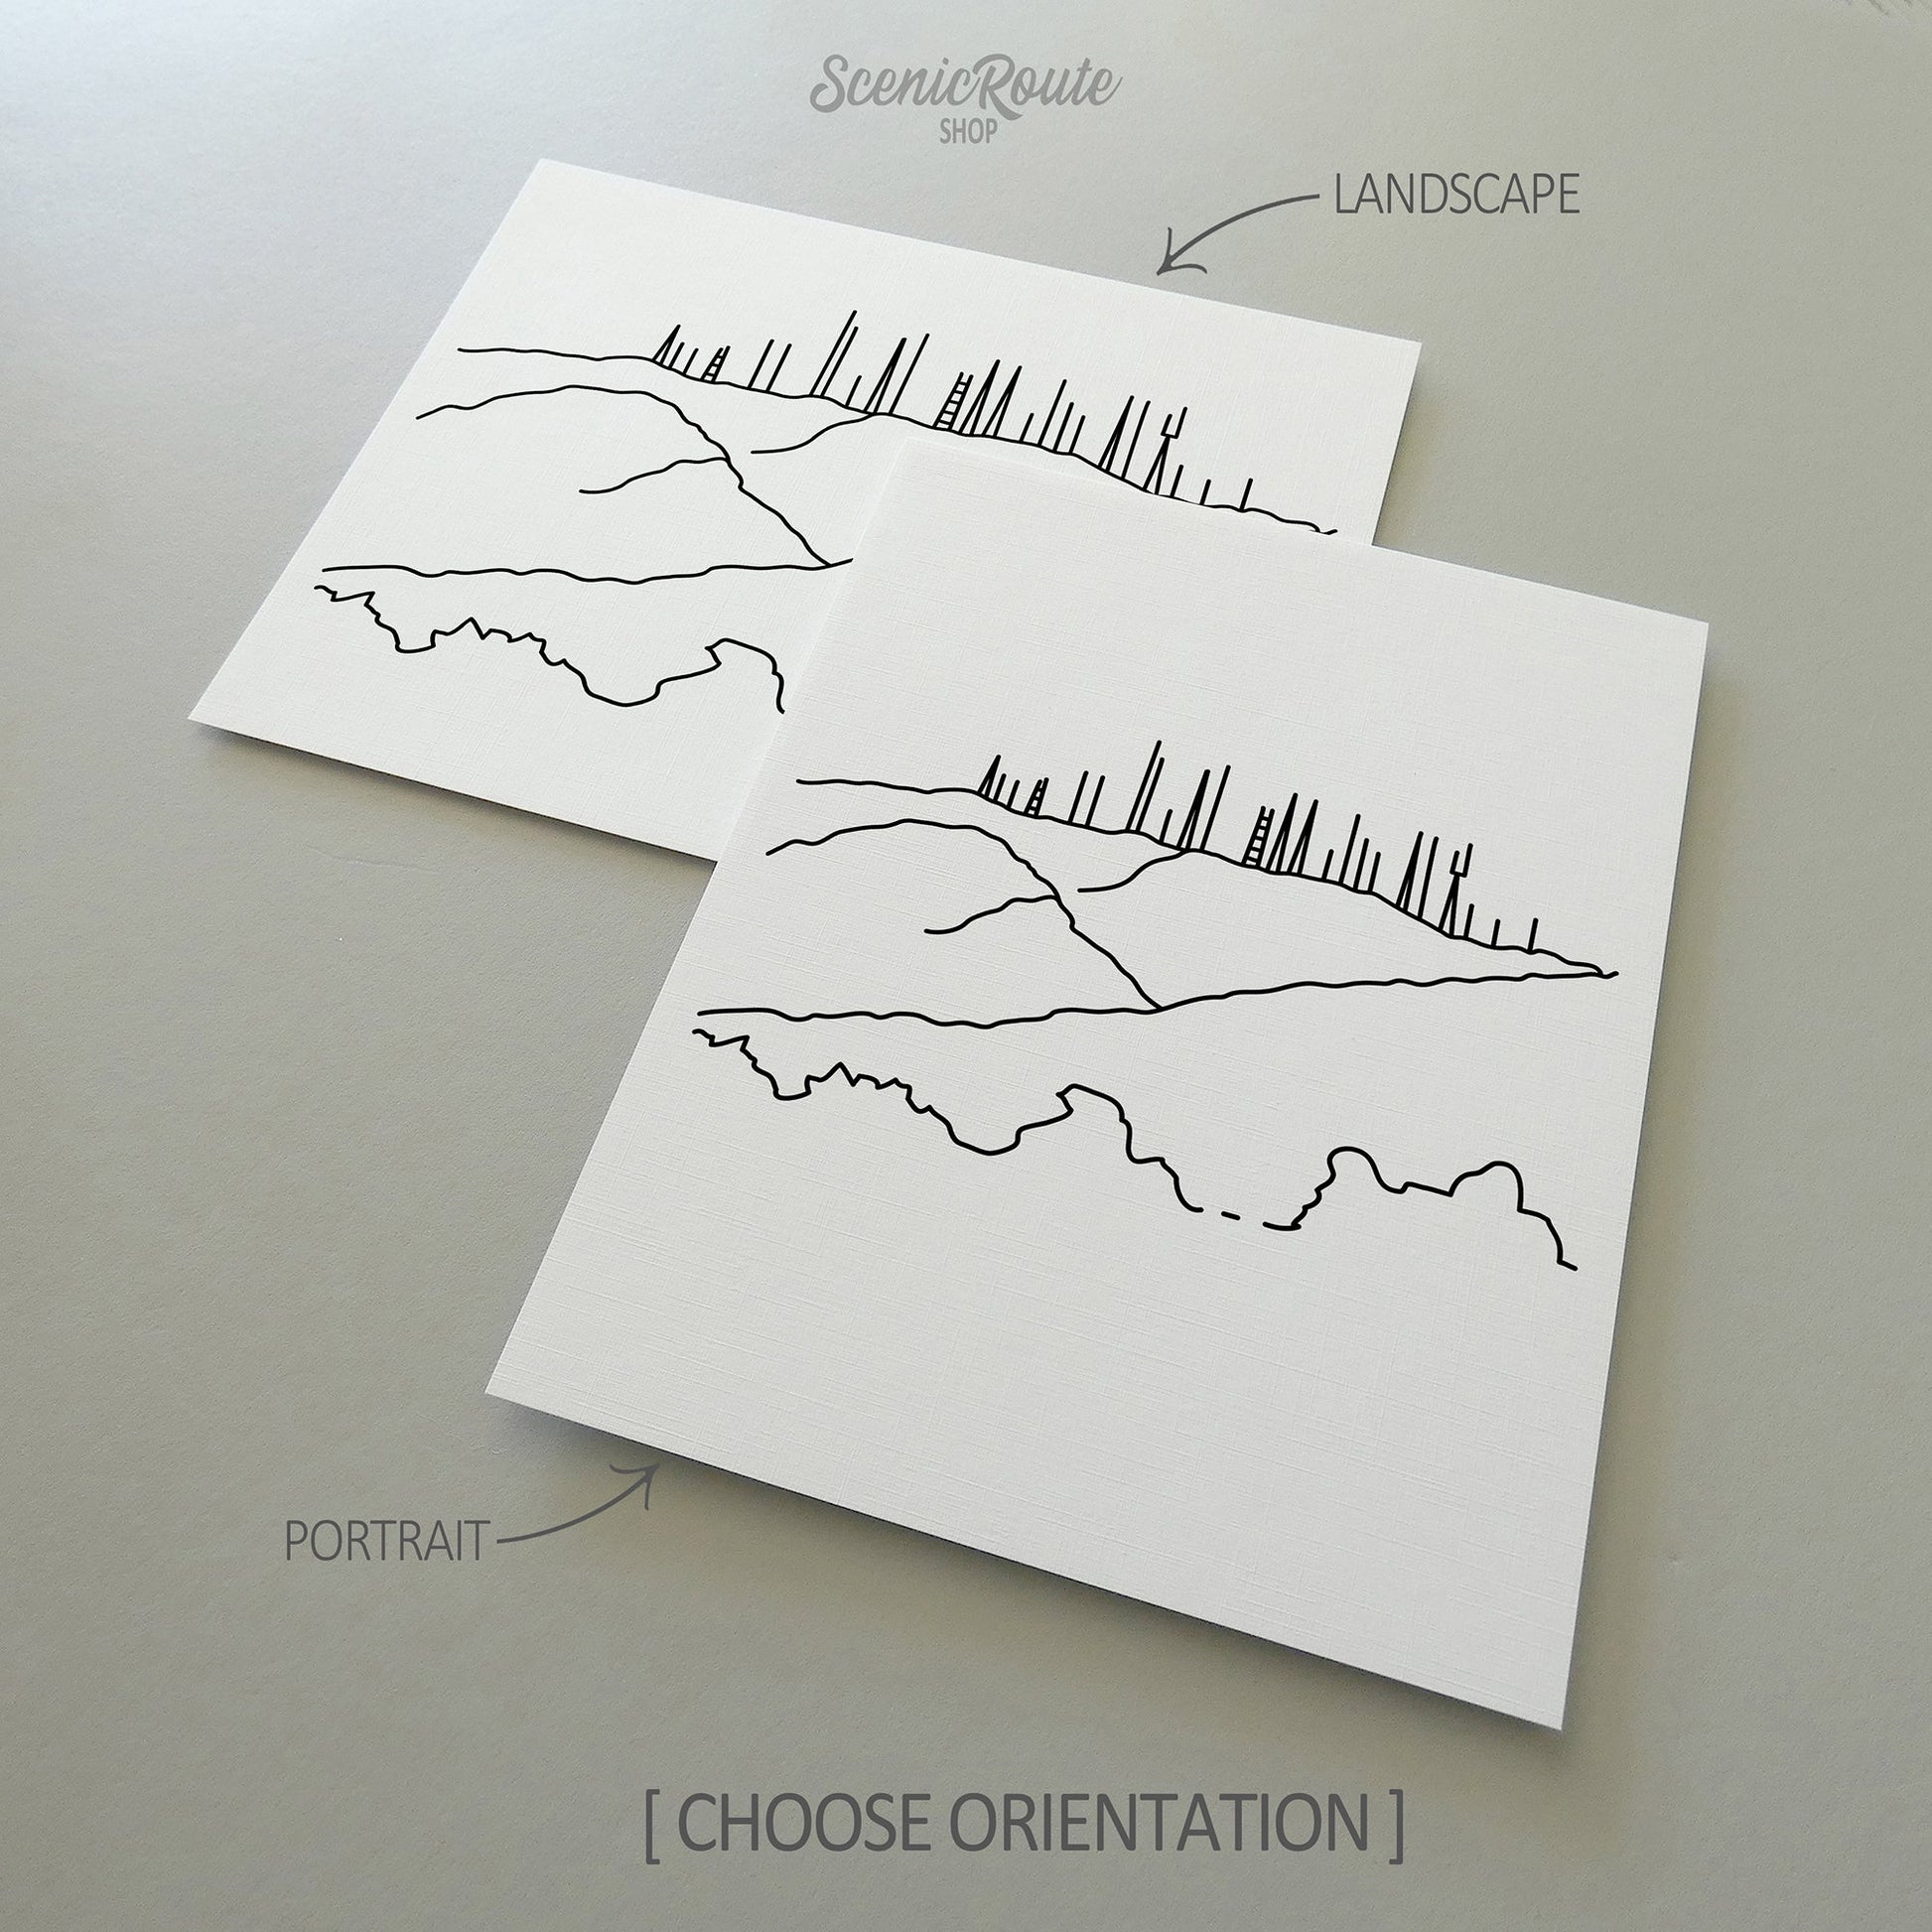 Two line art drawings of Phoenix South Mountain on white linen paper with a gray background.  The pieces are shown in portrait and landscape orientation for the available art print options.